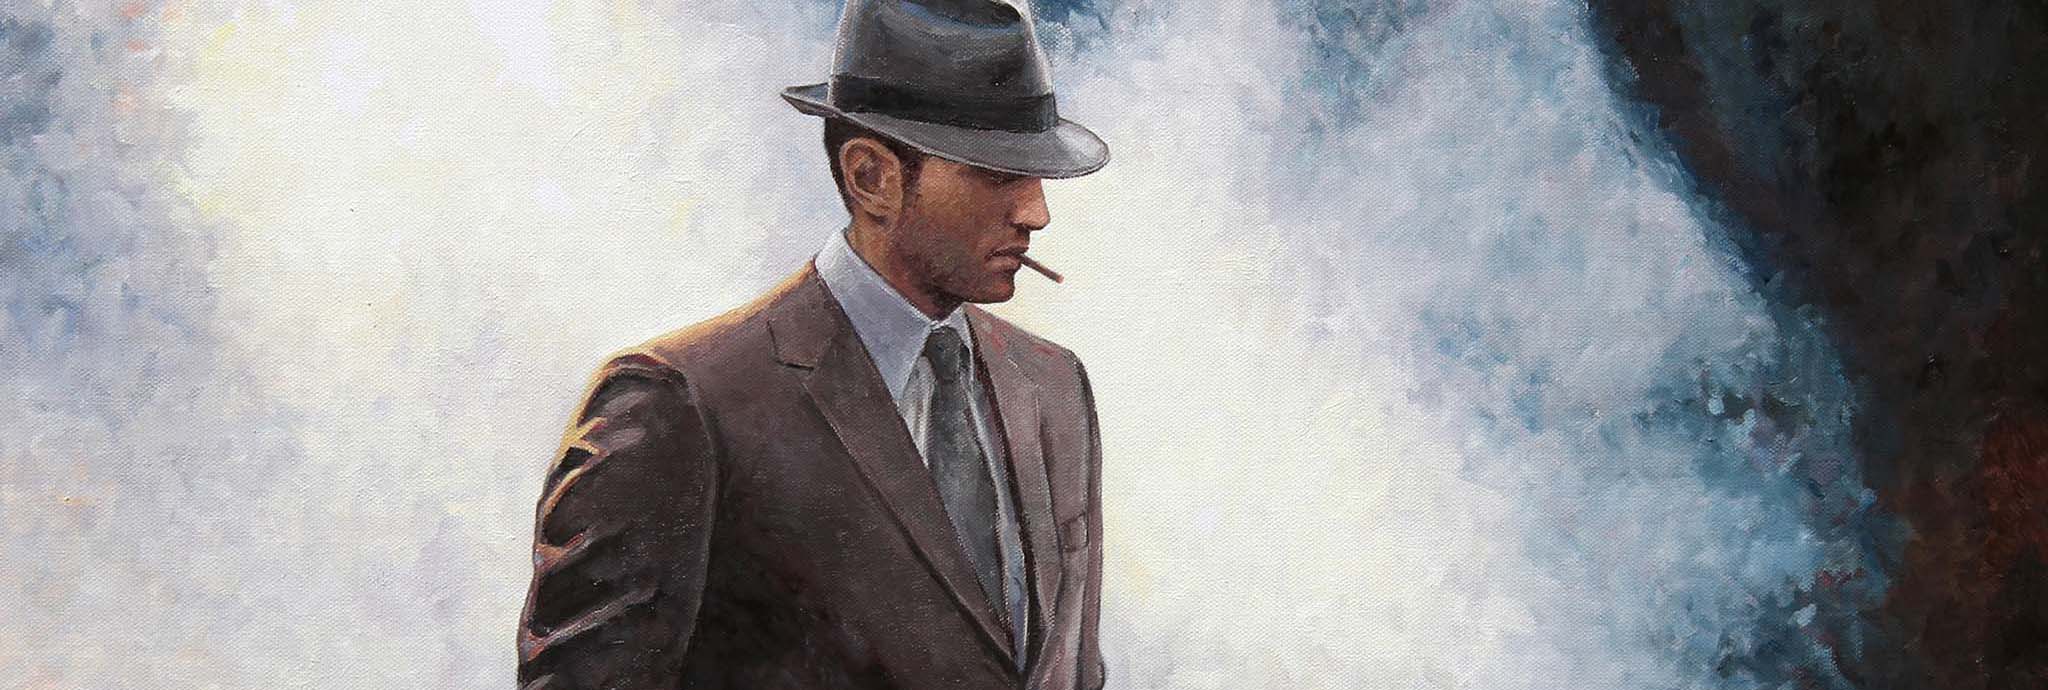 Film Noir art by Theo Michael an oil painting titled The Private Eye